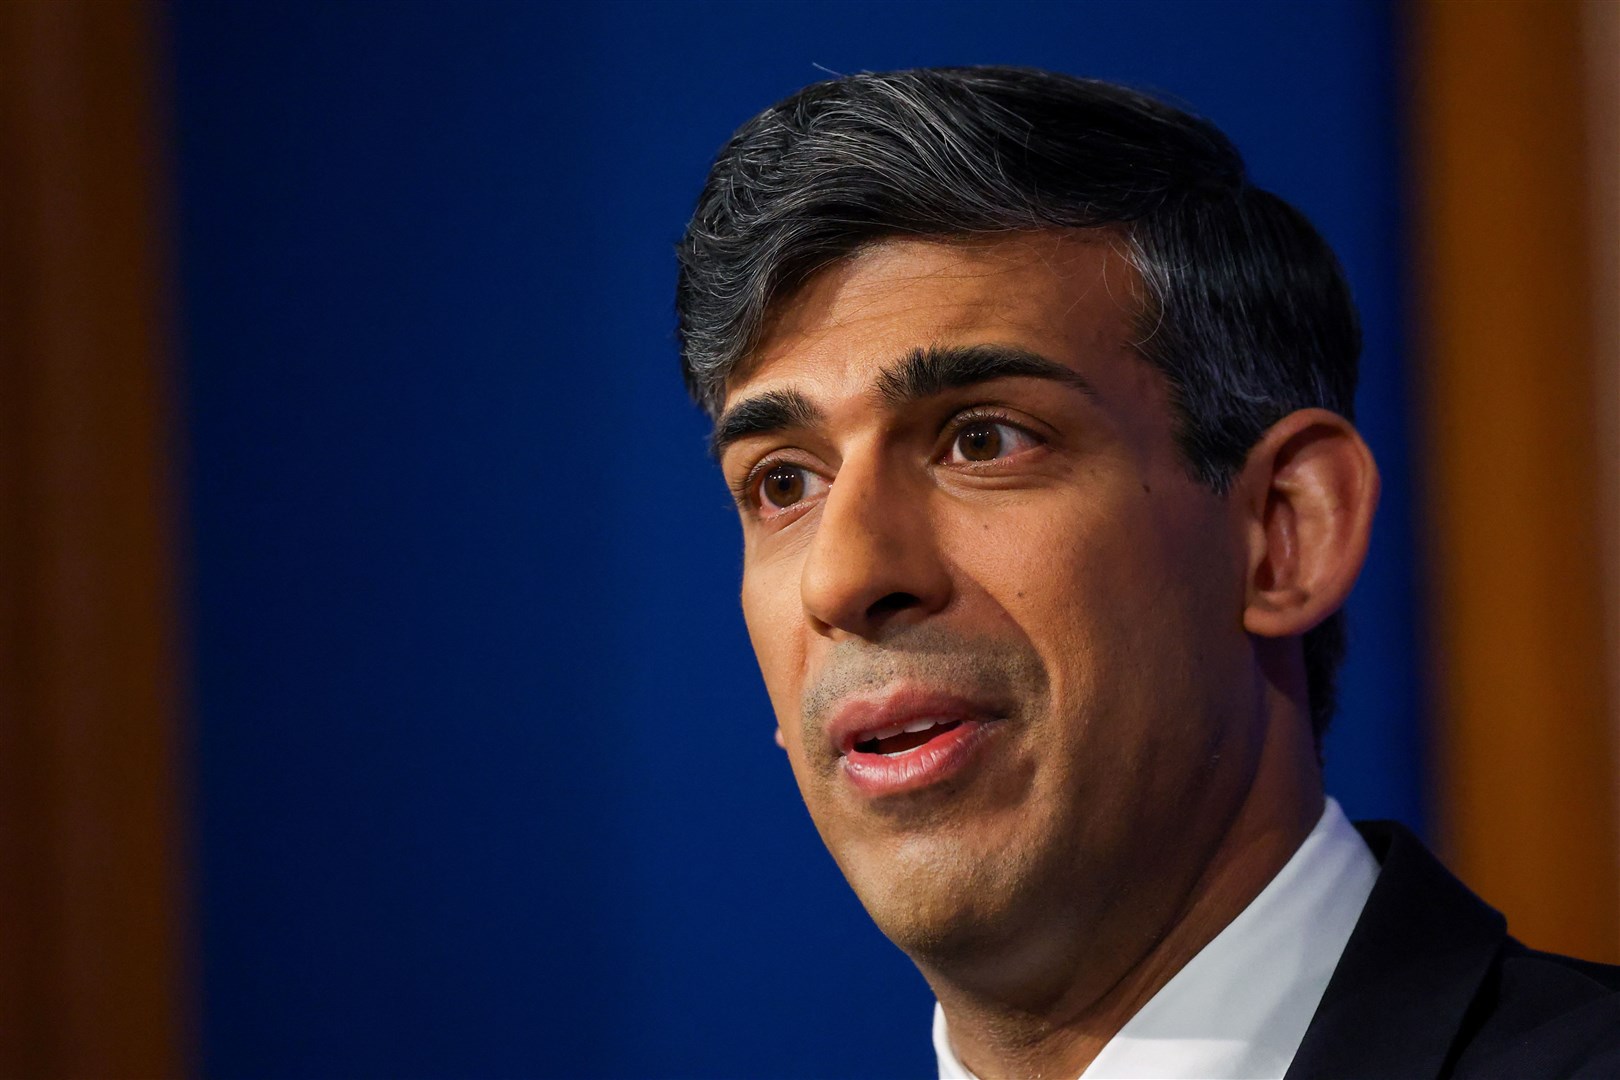 Rishi Sunak told a press conference it was right that the Metropolitan Police had apologised after the incident (Toby Melville/PA)